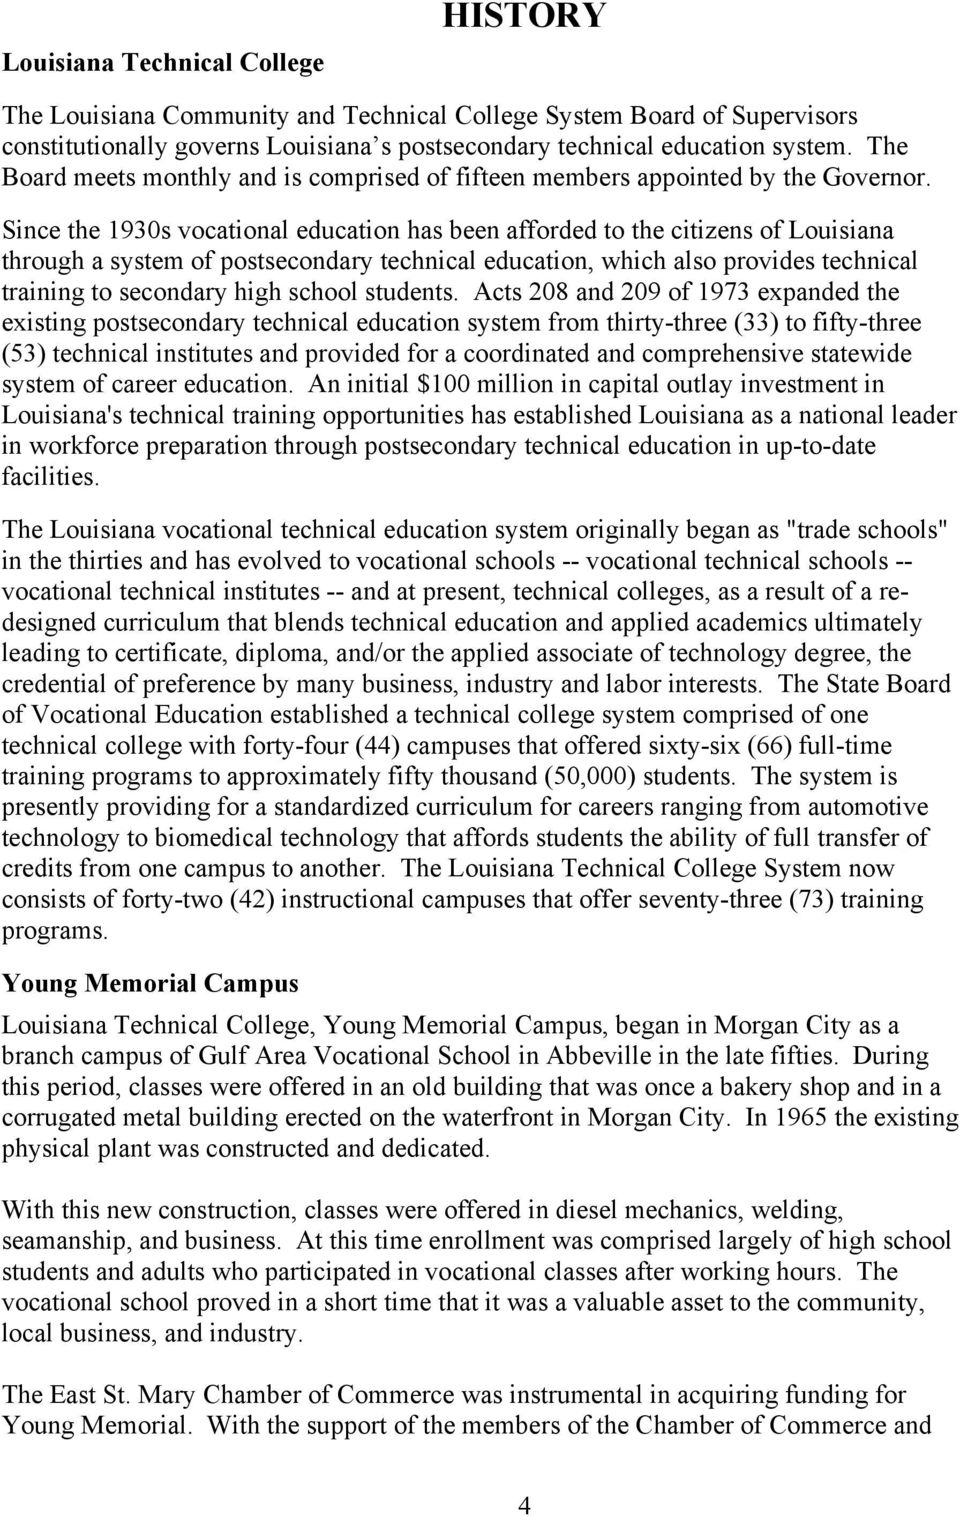 Since the 1930s vocational education has been afforded to the citizens of Louisiana through a system of postsecondary technical education, which also provides technical training to secondary high